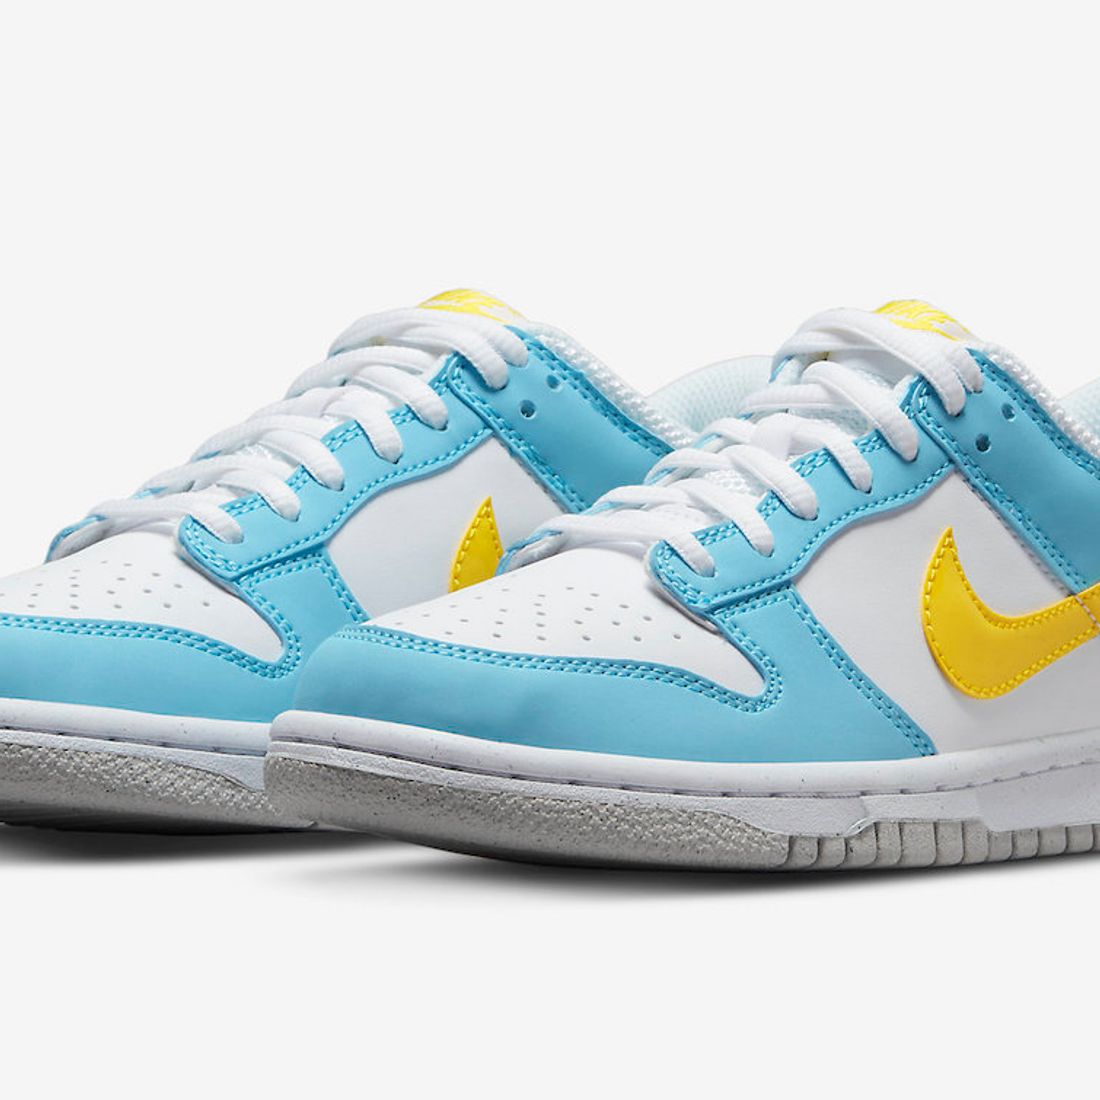 Homer dunk tennis shoes Simpson Visits the Nike Dunk Low Next Nature - Sneaker Freaker